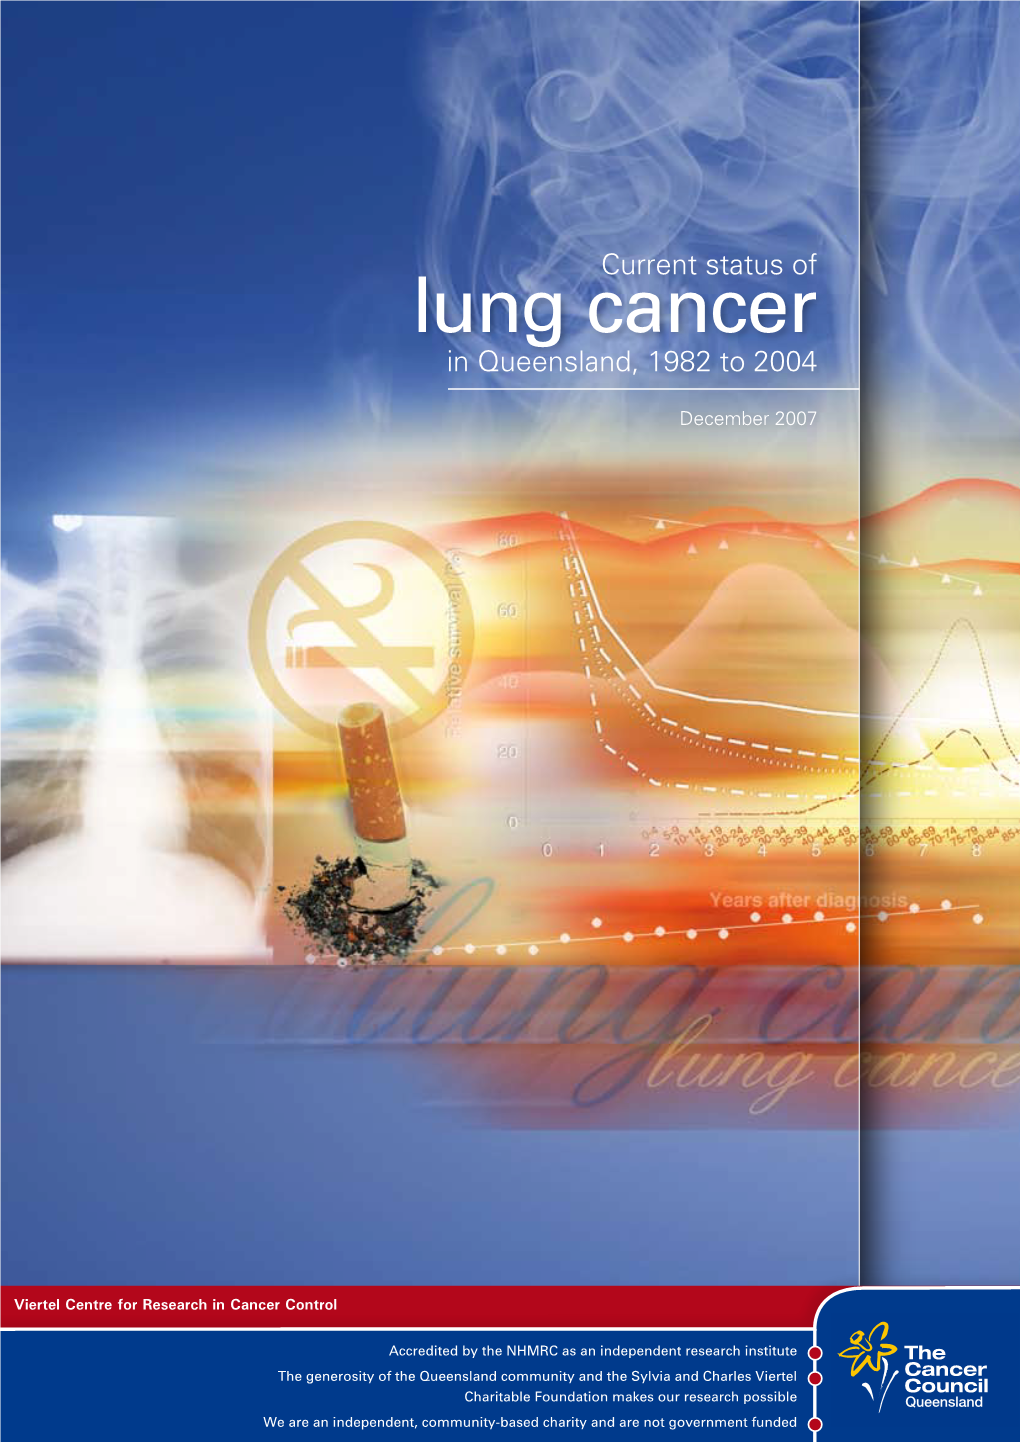 Lung Cancer in Queensland, 1982 to 2004